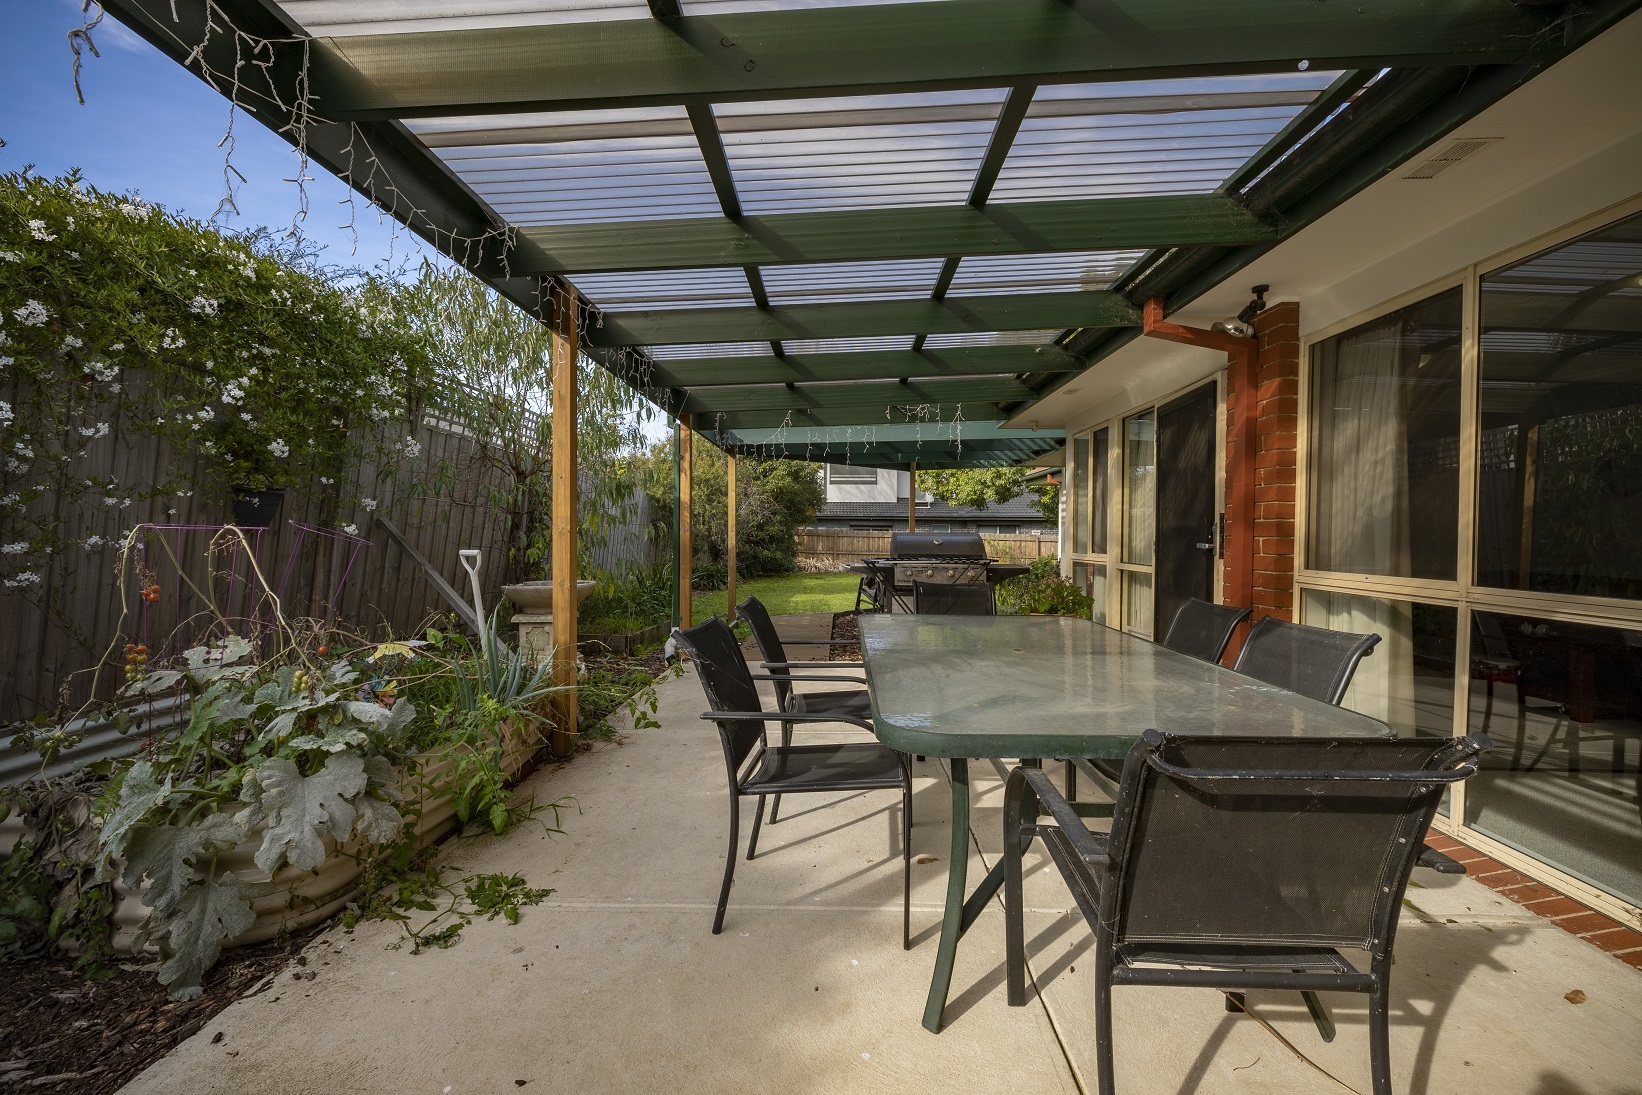 Undercover backyard area with table and chairs